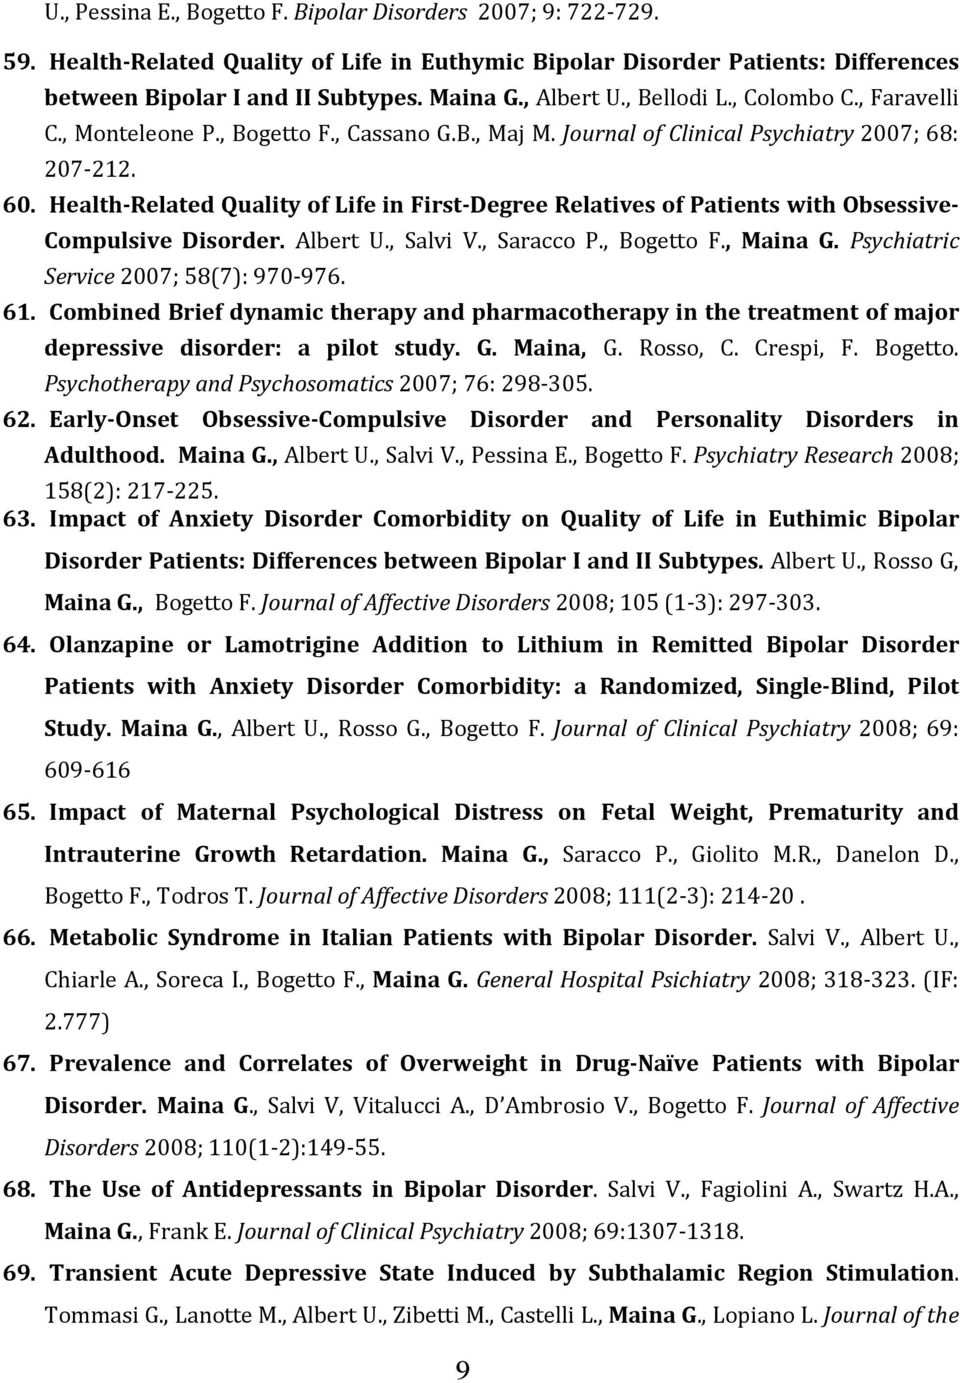 Health-Related Quality of Life in First-Degree Relatives of Patients with Obsessive- Compulsive Disorder. Albert U., Salvi V., Saracco P., Bogetto F., Maina G.